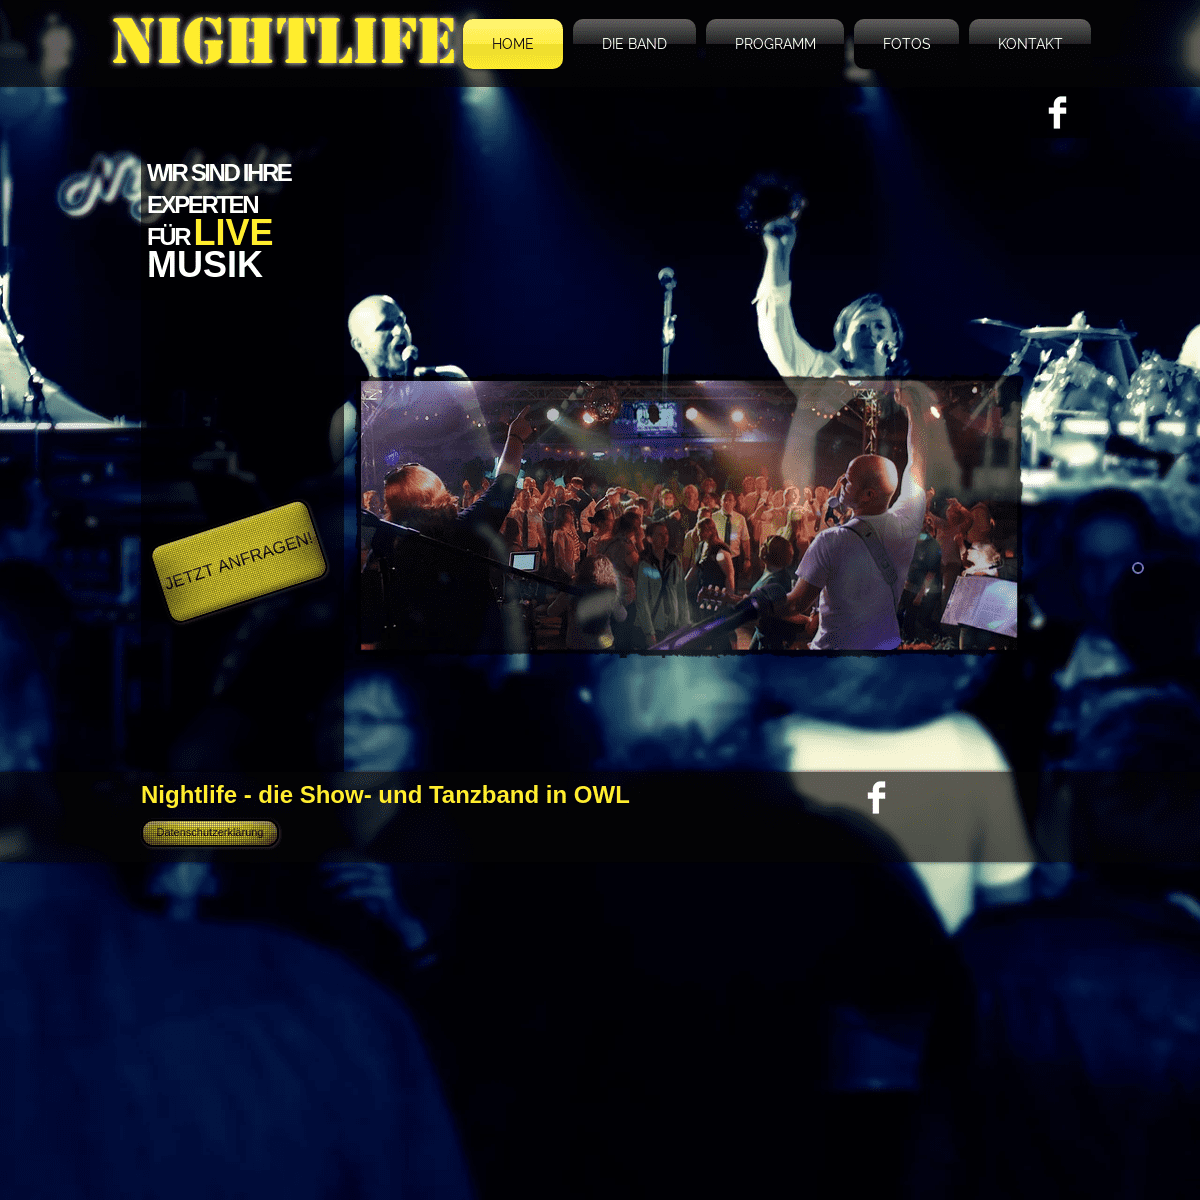 A complete backup of nightlife-partyband.de